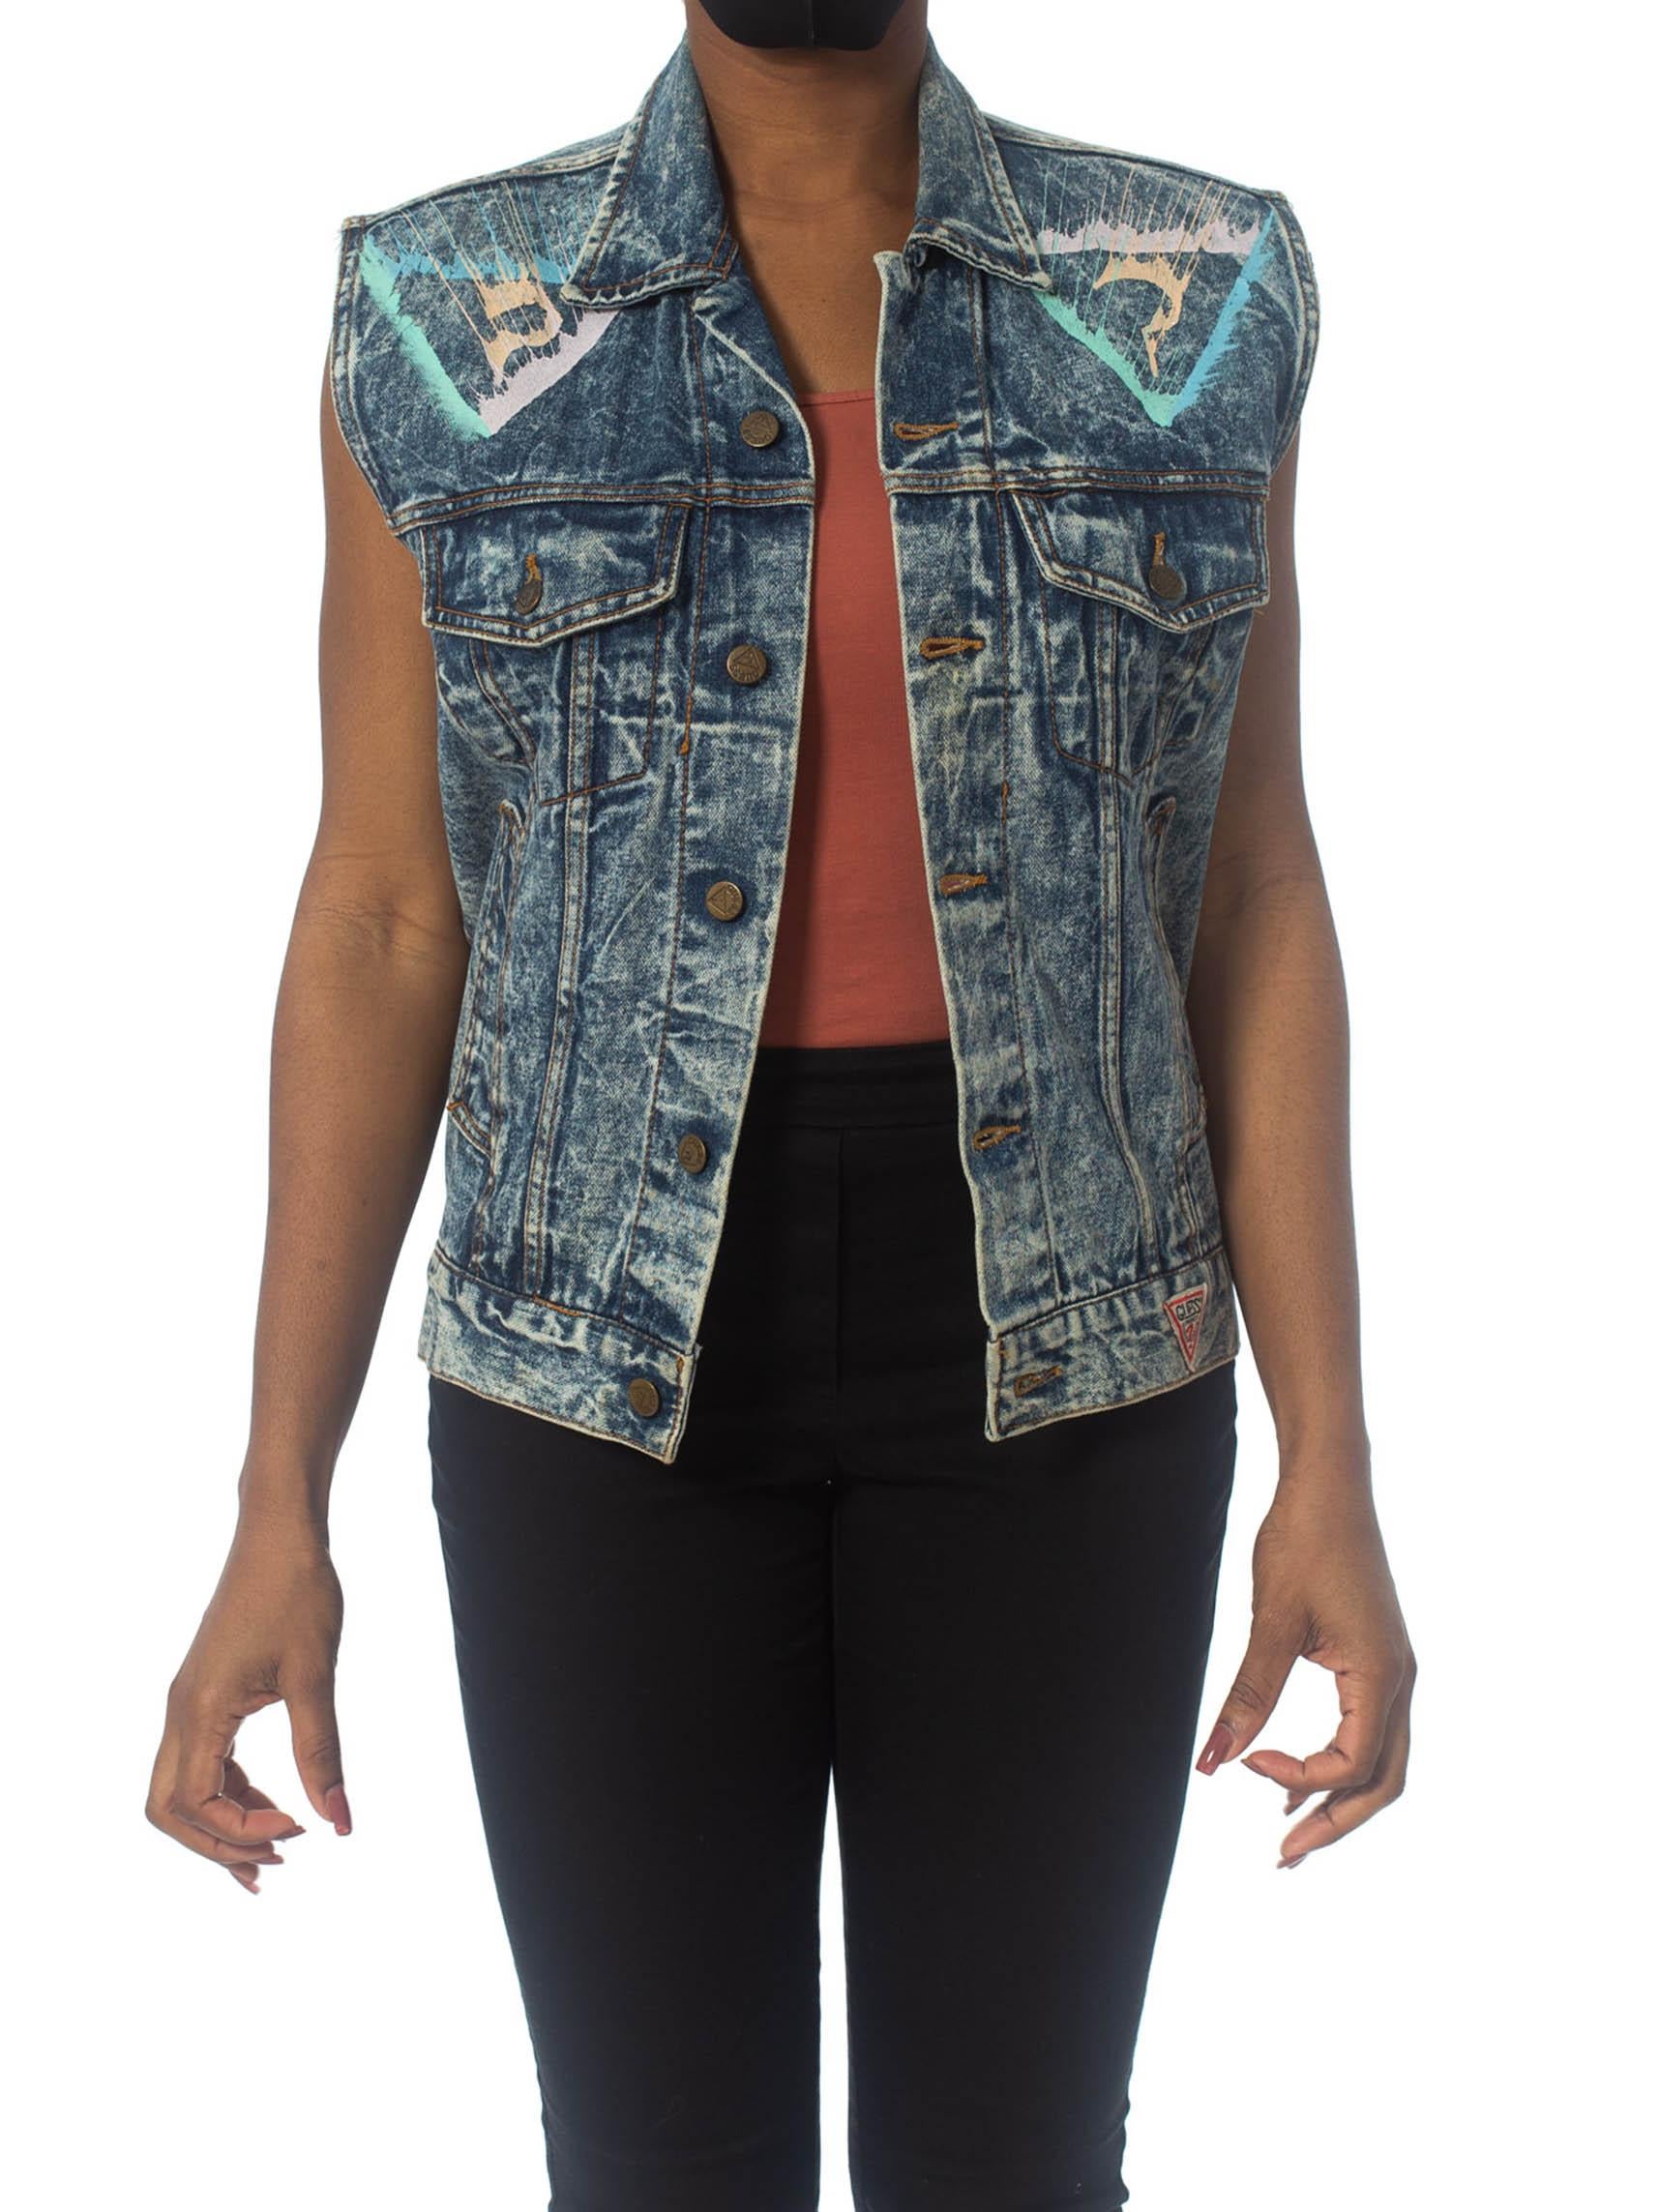 1990S GUESS Glitter Puffy Painted Acid Washed Denim Vest For Sale 2